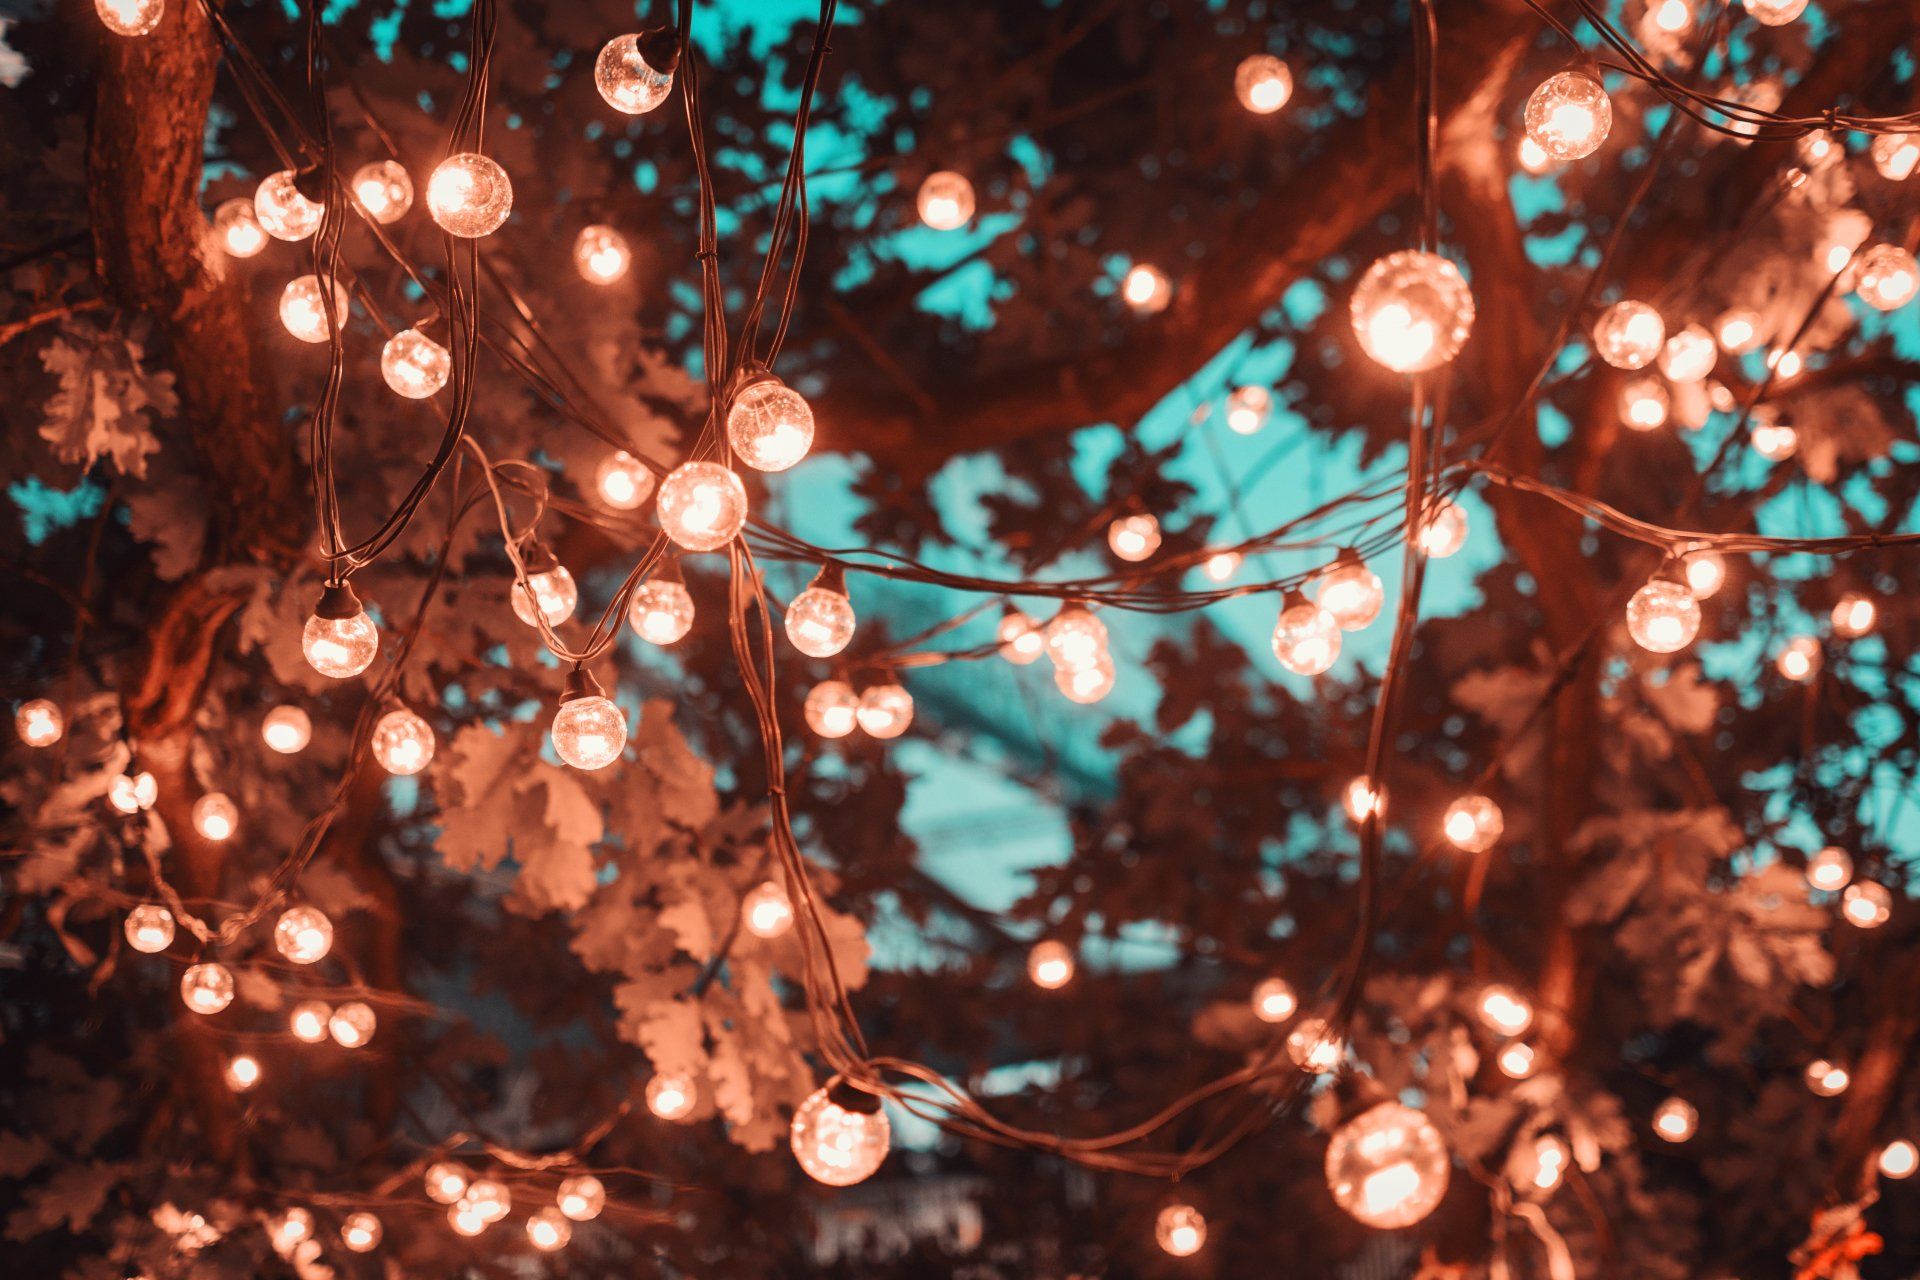 Multi-coloured fairy lights on tree branches